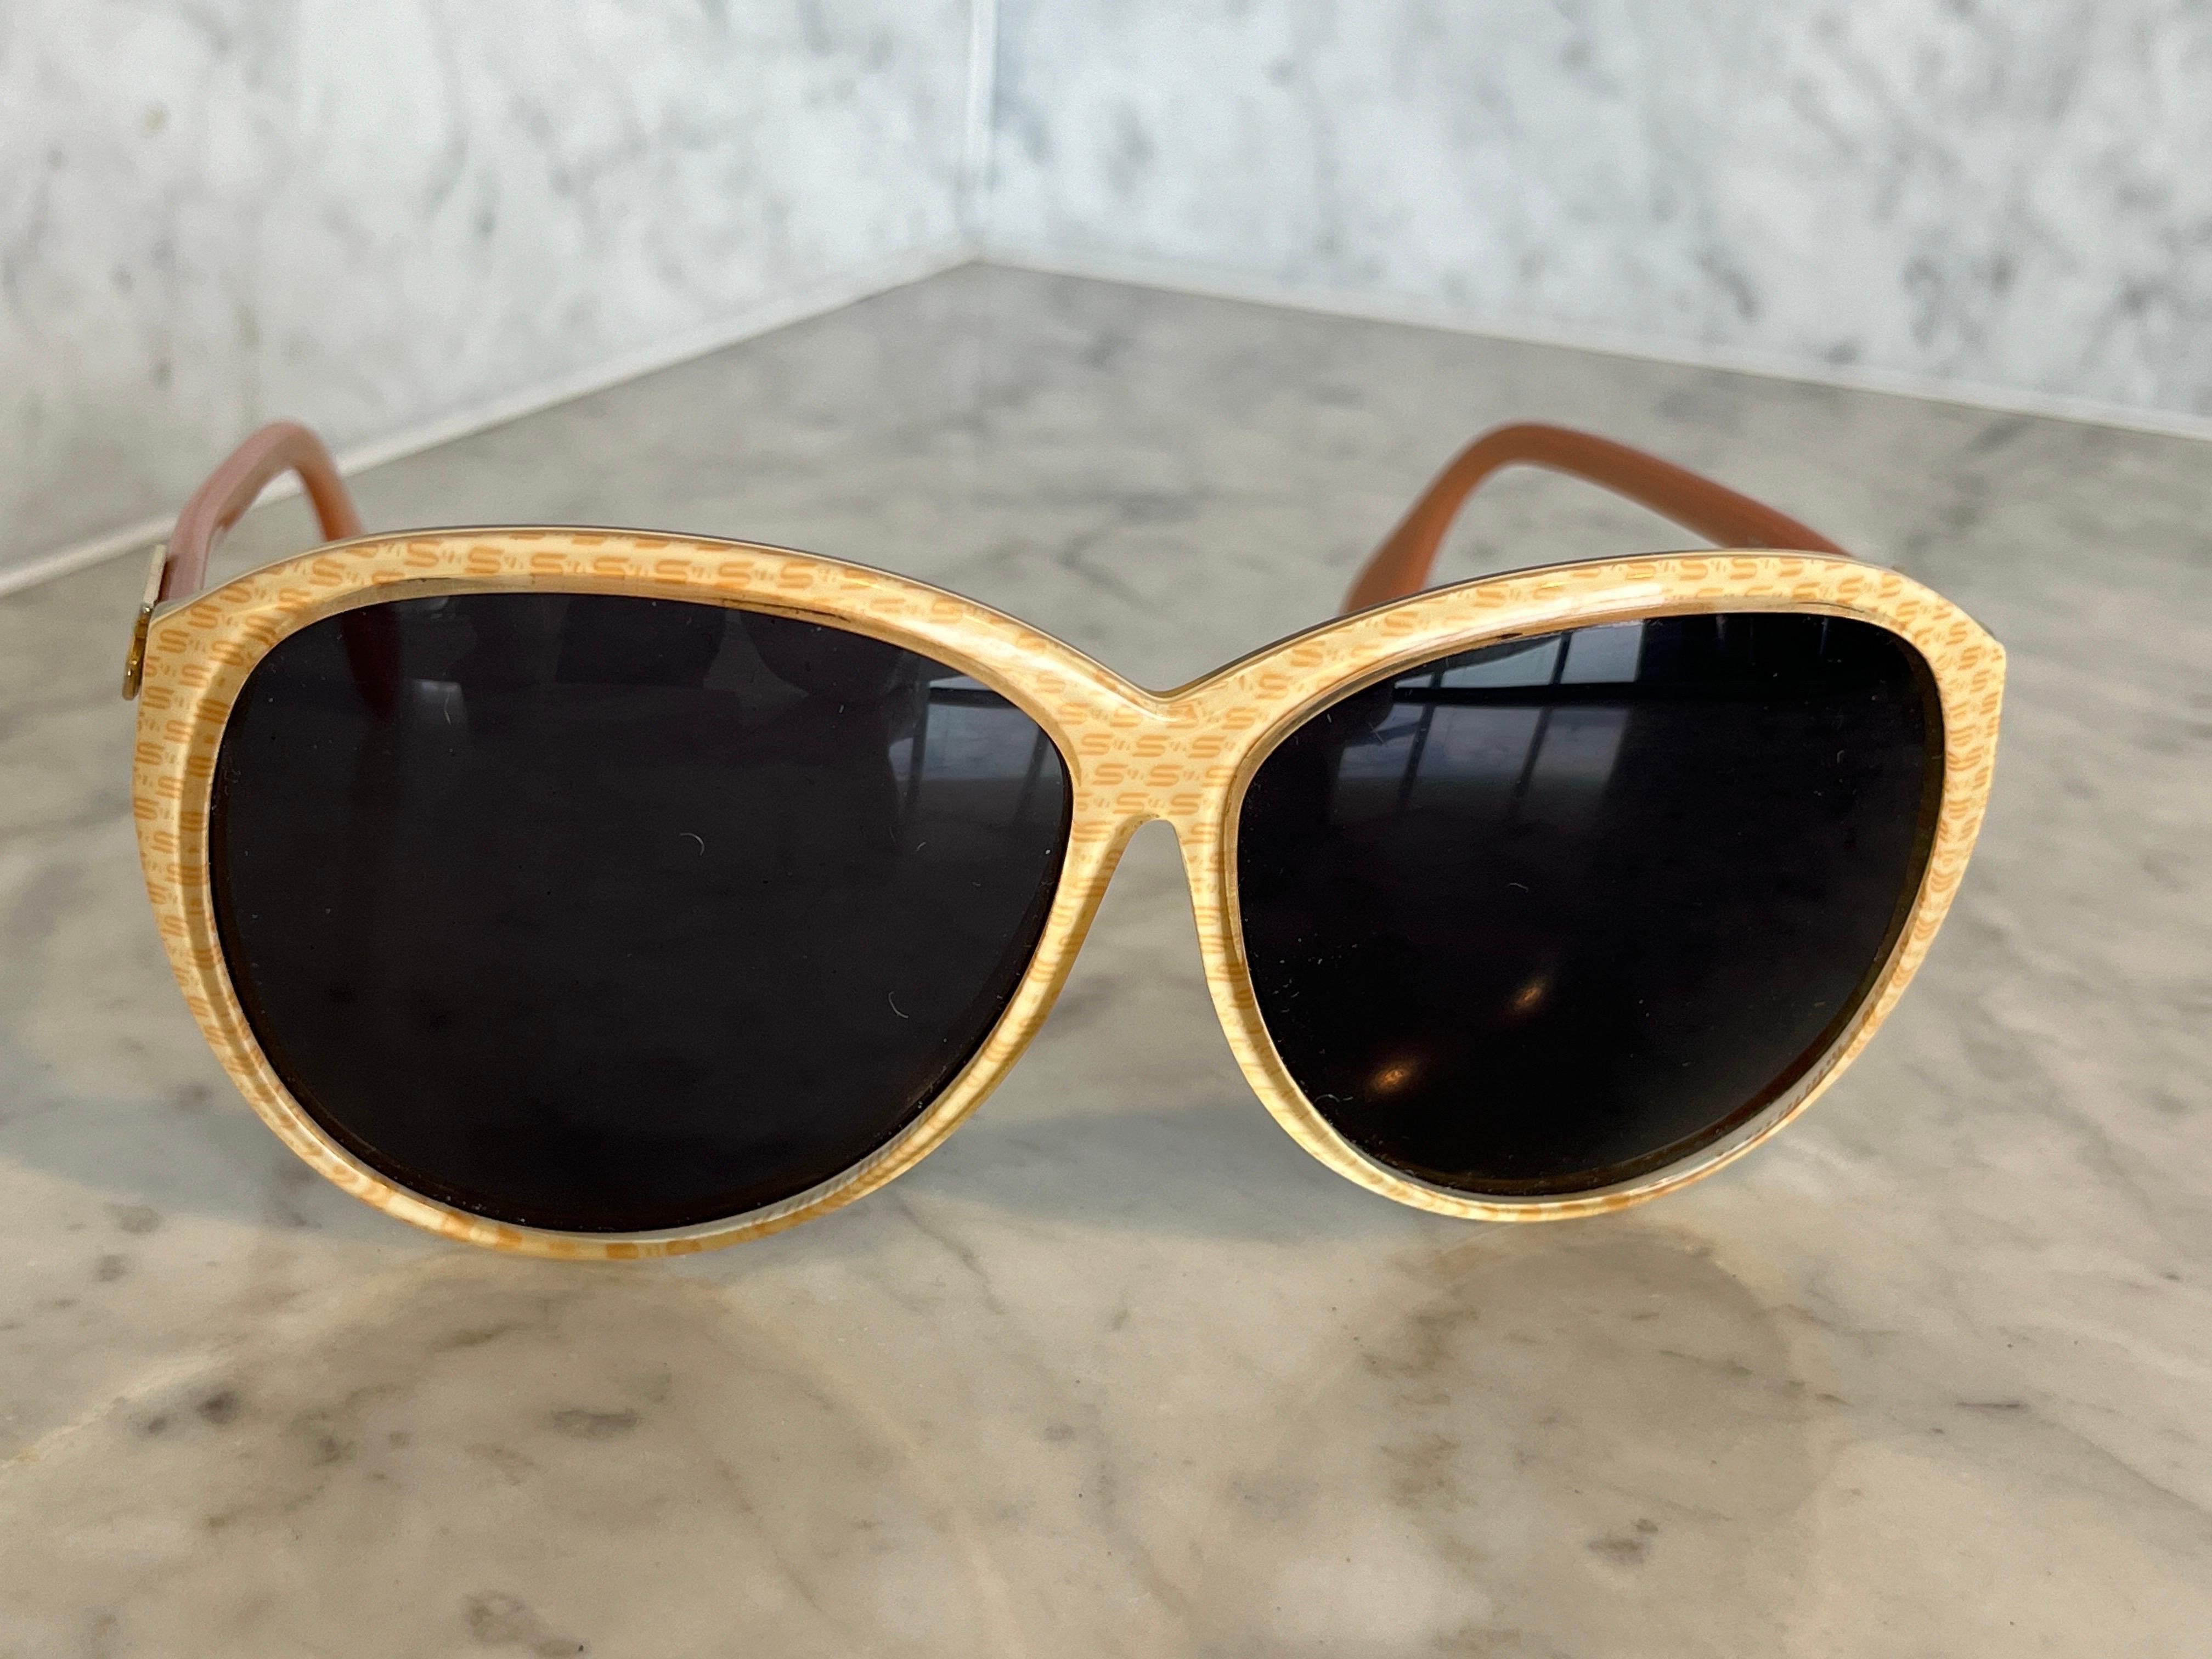 Vintage 1980’s 2 tone apricot sunglasses by Silhouette

With unique monogram

Great to dress up an outfit or for that fun resort look

Frames and lenses I good condition. New lenses fitted.